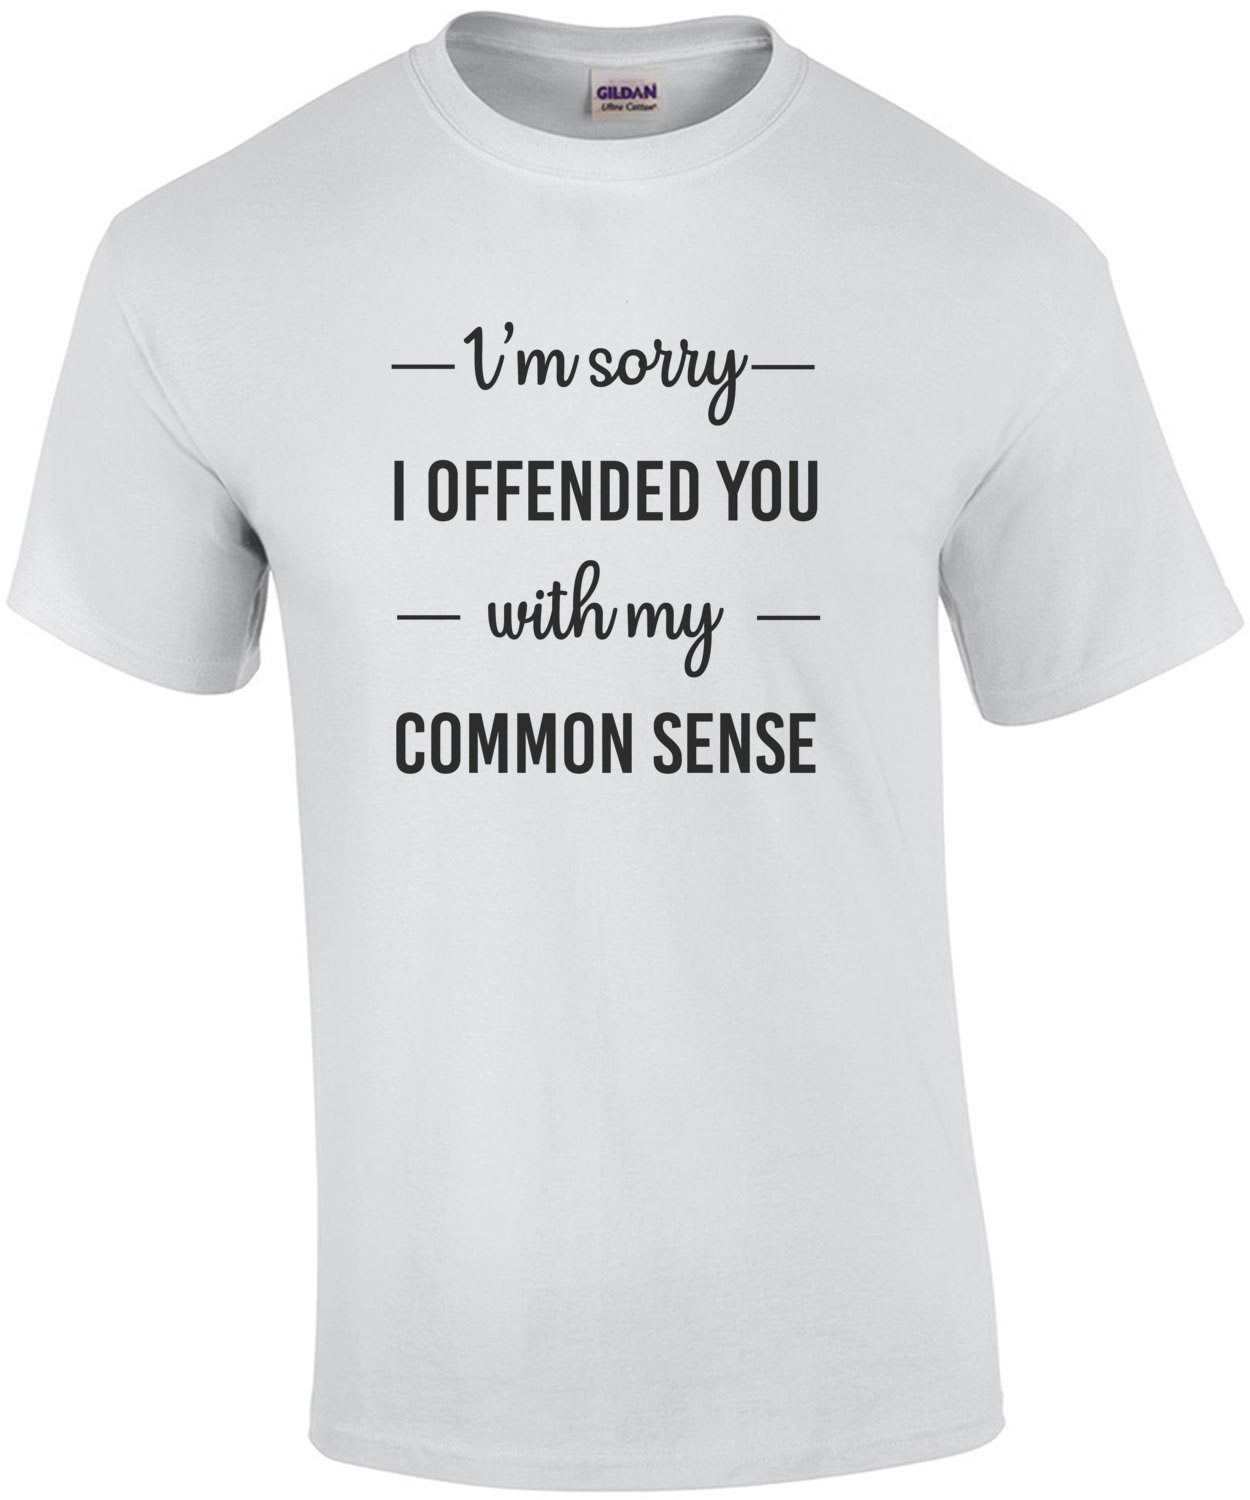 I'm sorry I offended you with my common sense - sarcastic t-shirt